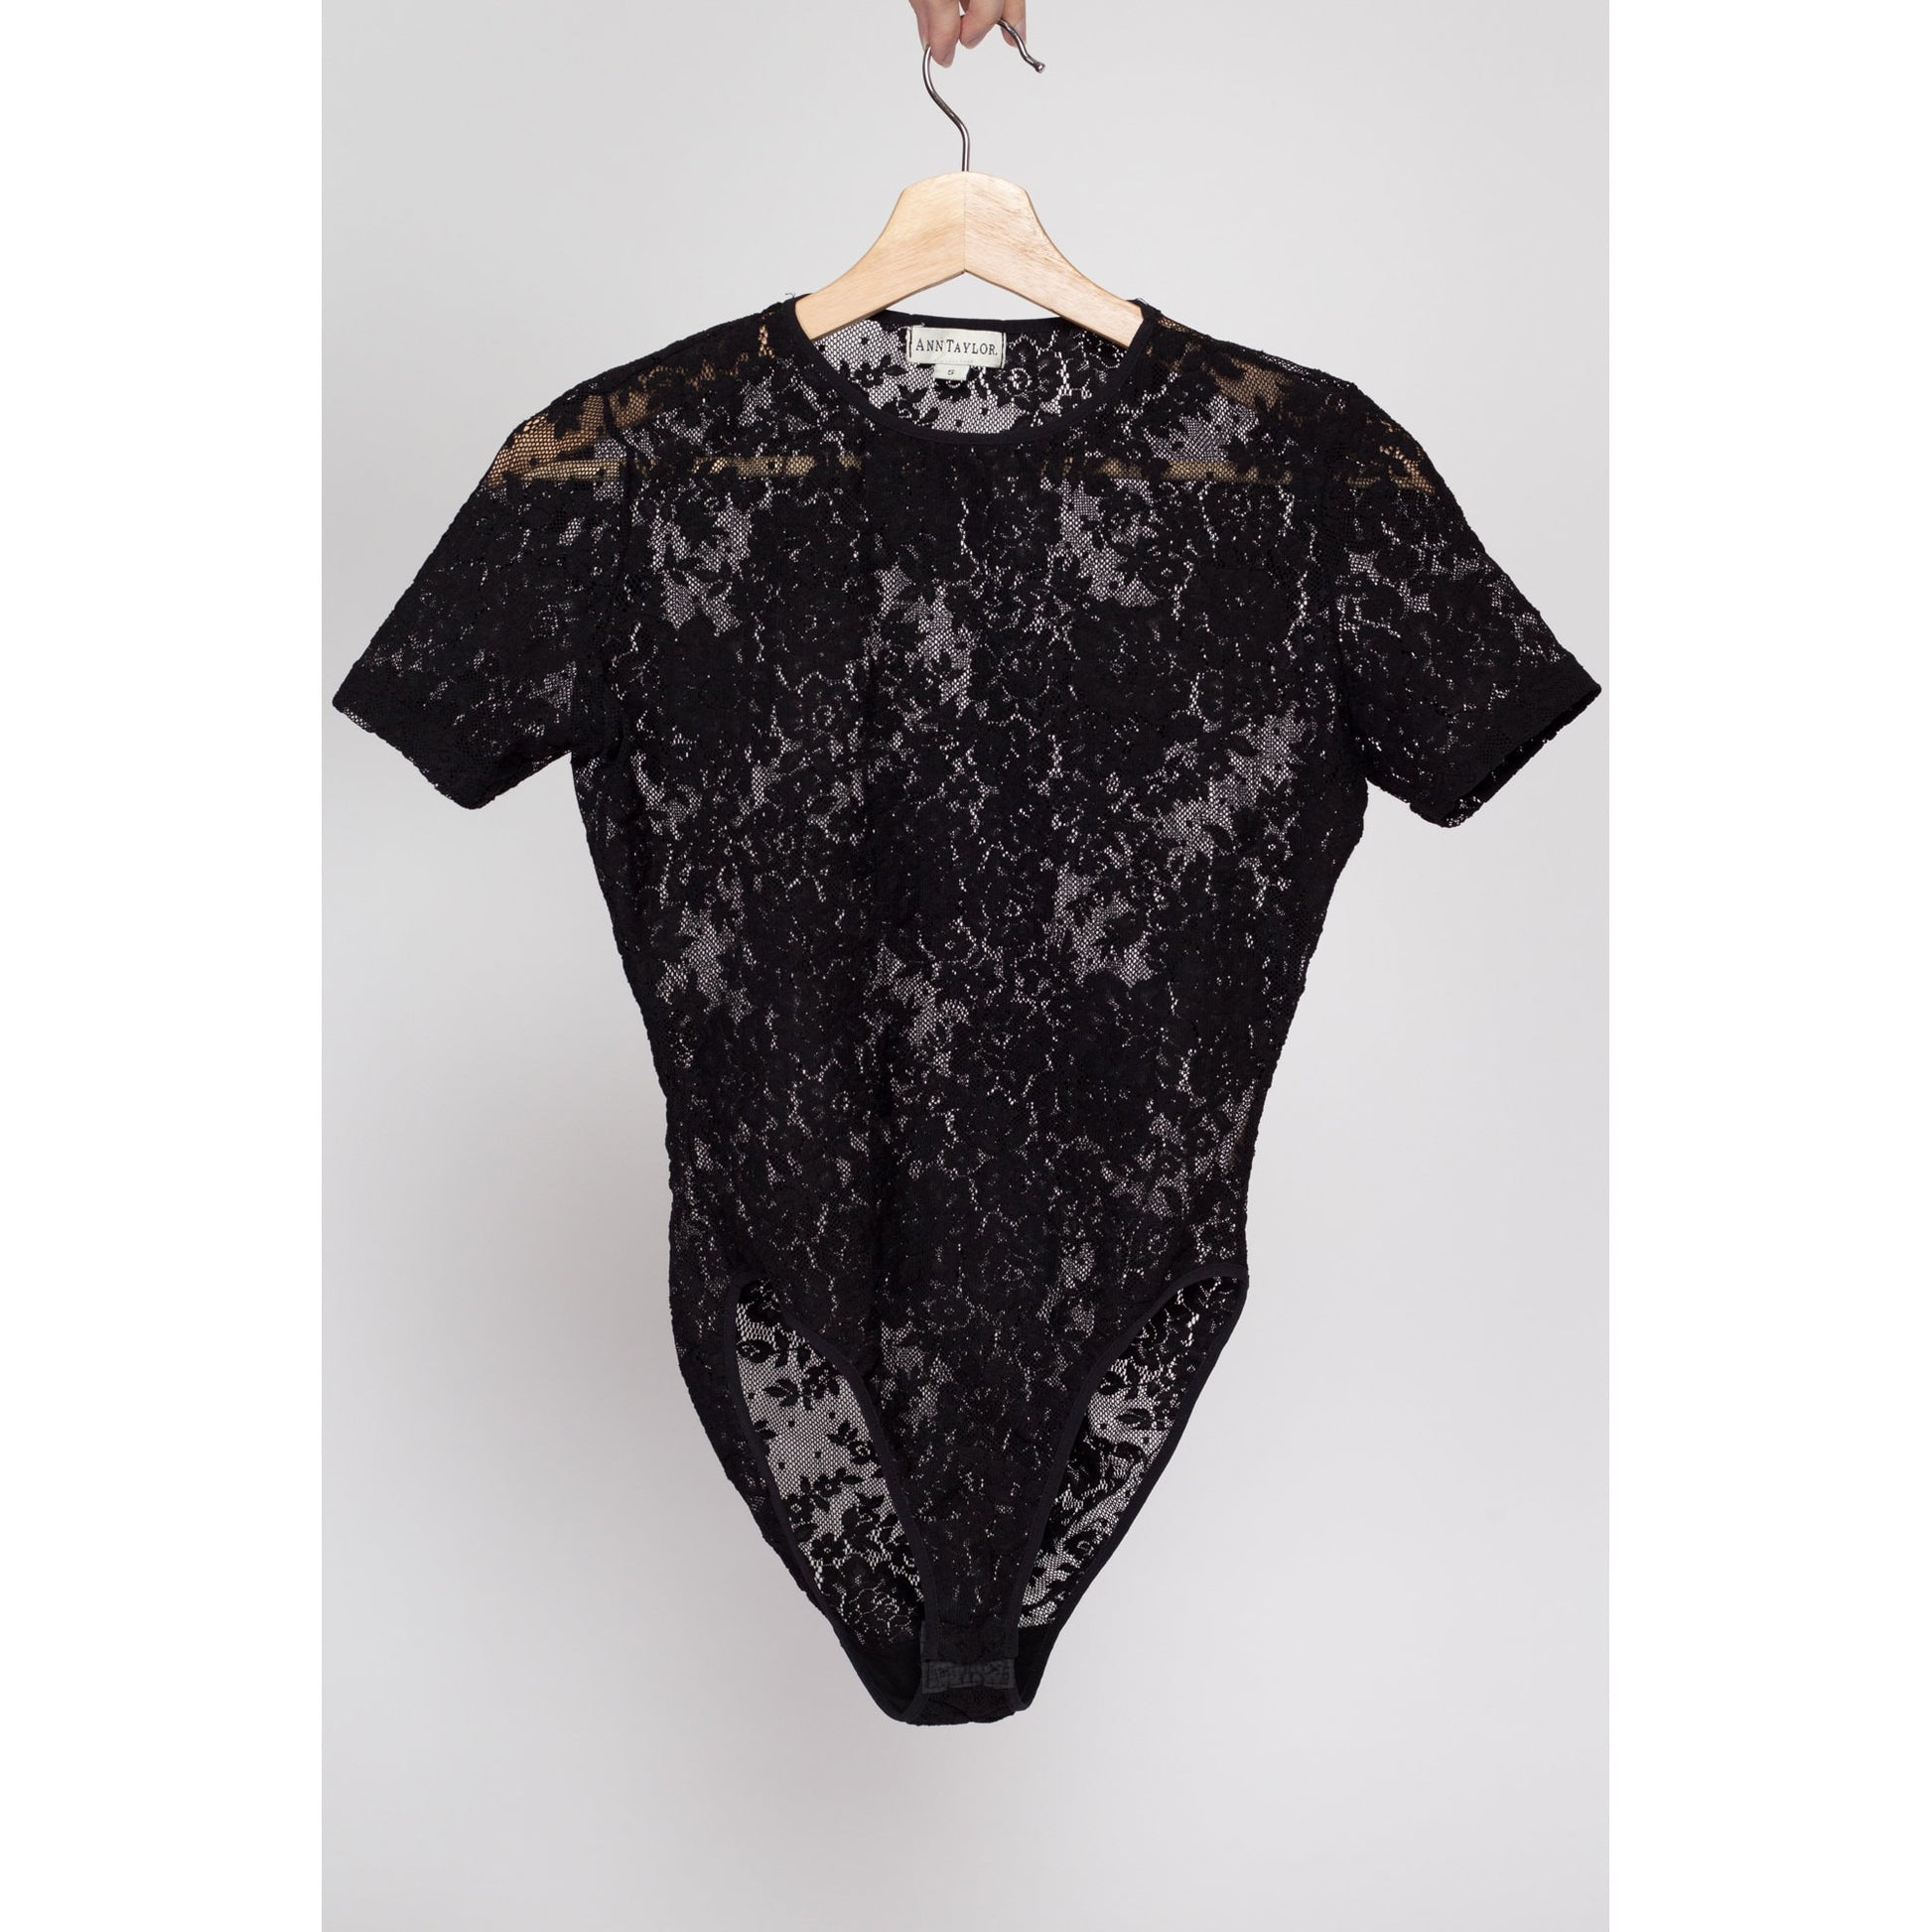 Small 90s Black Lace Bodysuit Top | Vintage Ann Taylor Sheer Short Sleeve One Piece